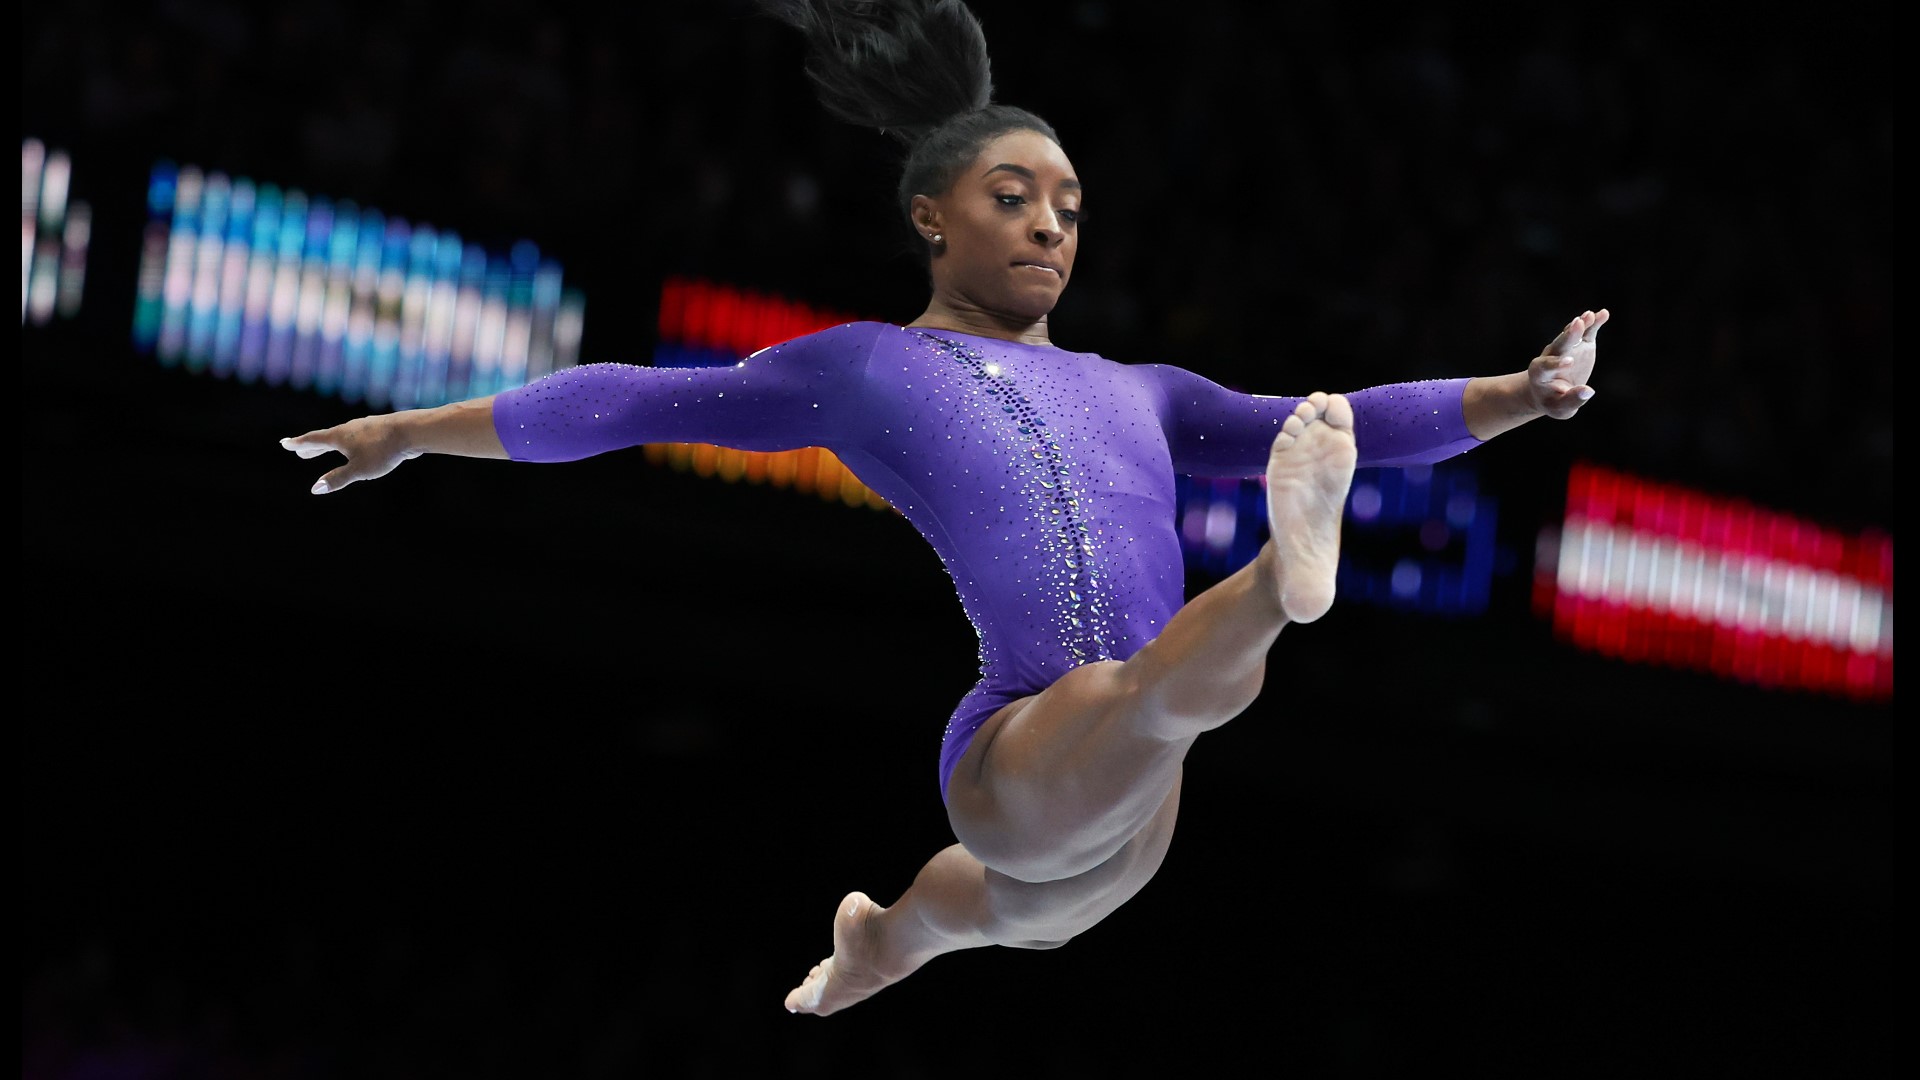 Biles has won a record 37 medals at the world championships and Olympics.